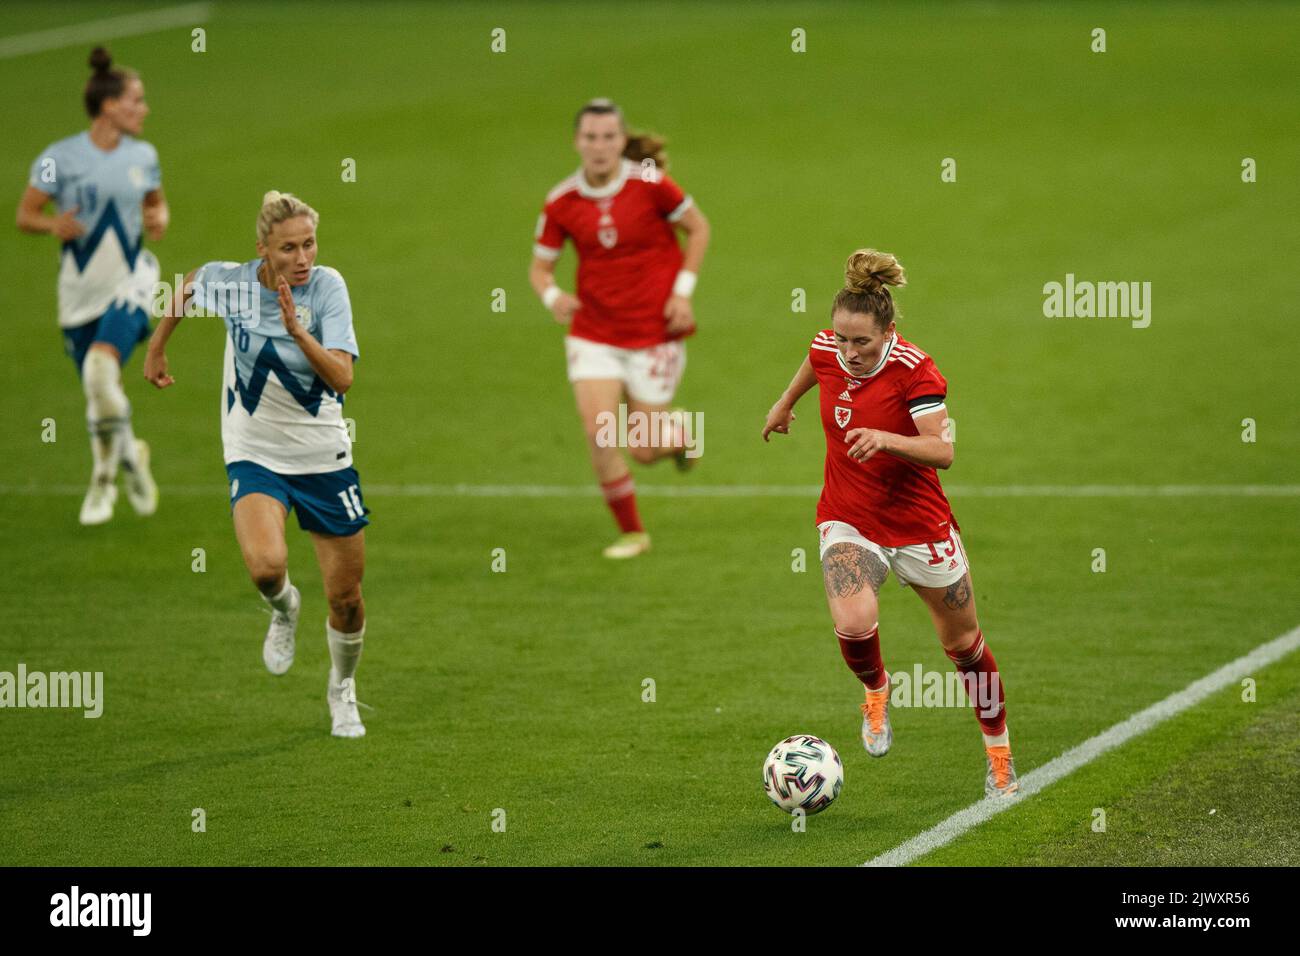 Cardiff, UK. 6th Sep, 2022. Rachel Rowe of Wales during the Wales v Slovenia Women's World Cup Qualification match. Credit: Gruffydd Thomas/Alamy Live News Stock Photo